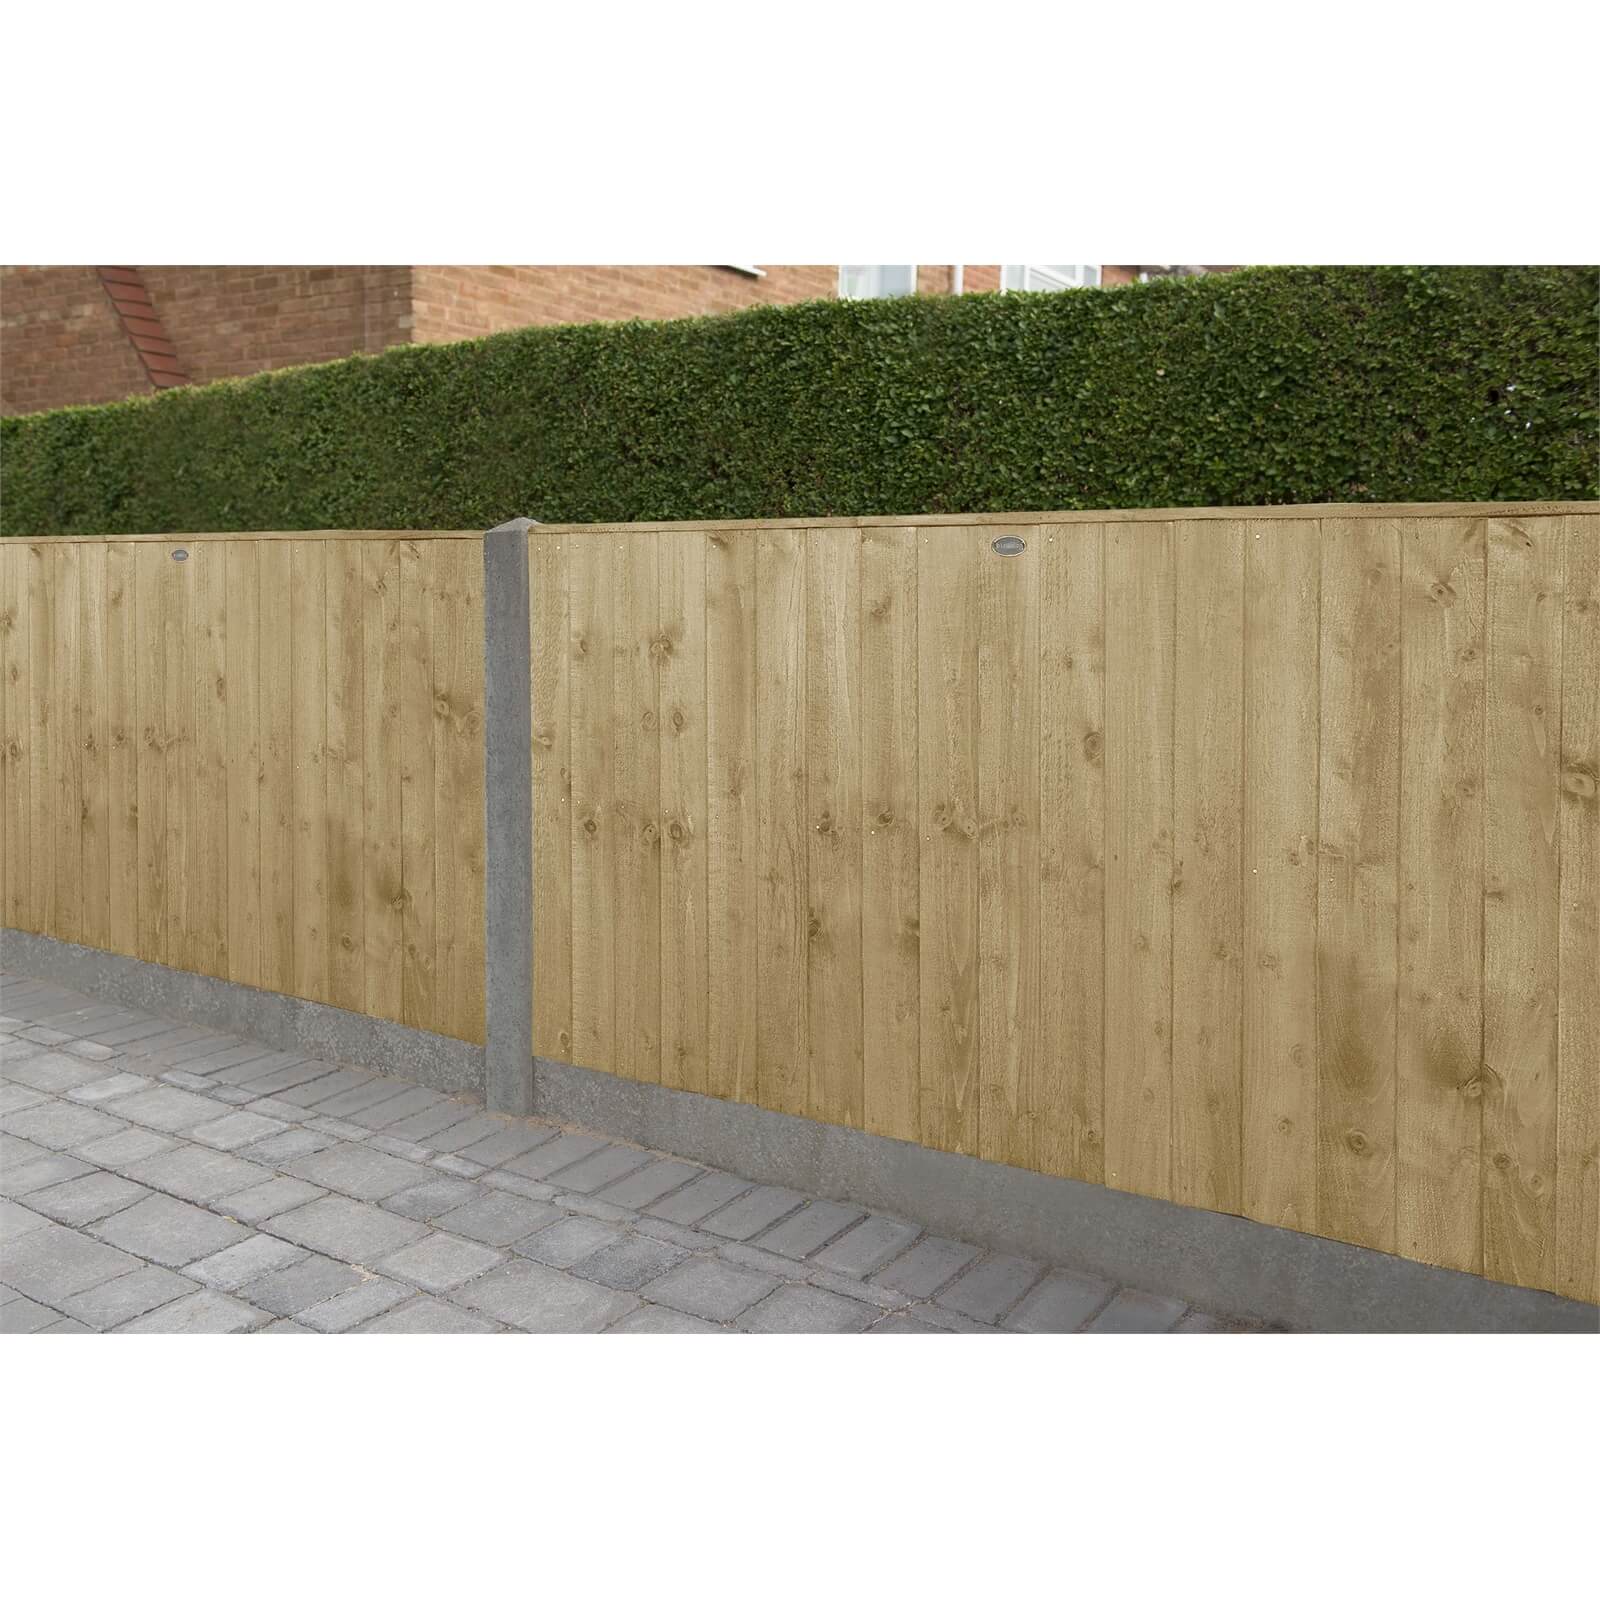 6ft x 3ft (1.83m x 0.93m) Pressure Treated Featheredge Fence Panel - Pack of 4